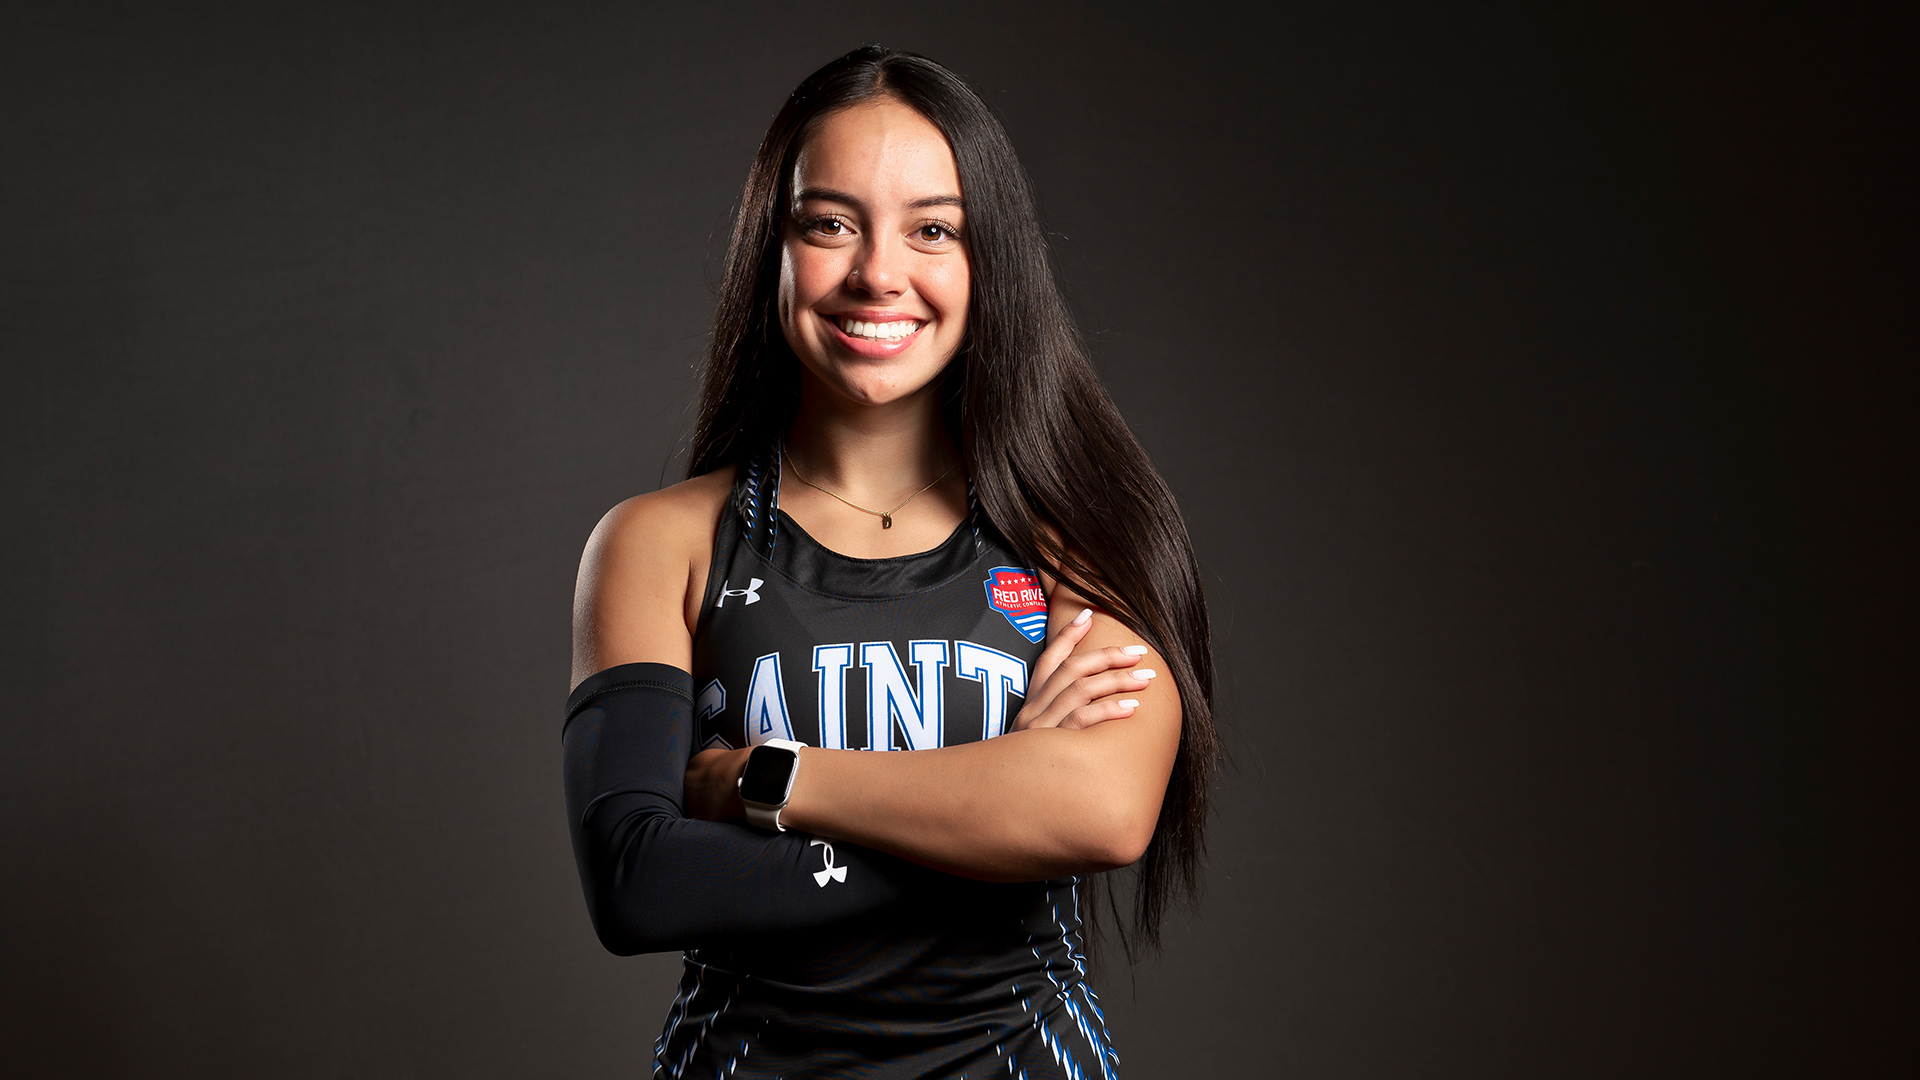 Alexandria Segura along with the relay team broke the OLLU record and qualified for nationals.